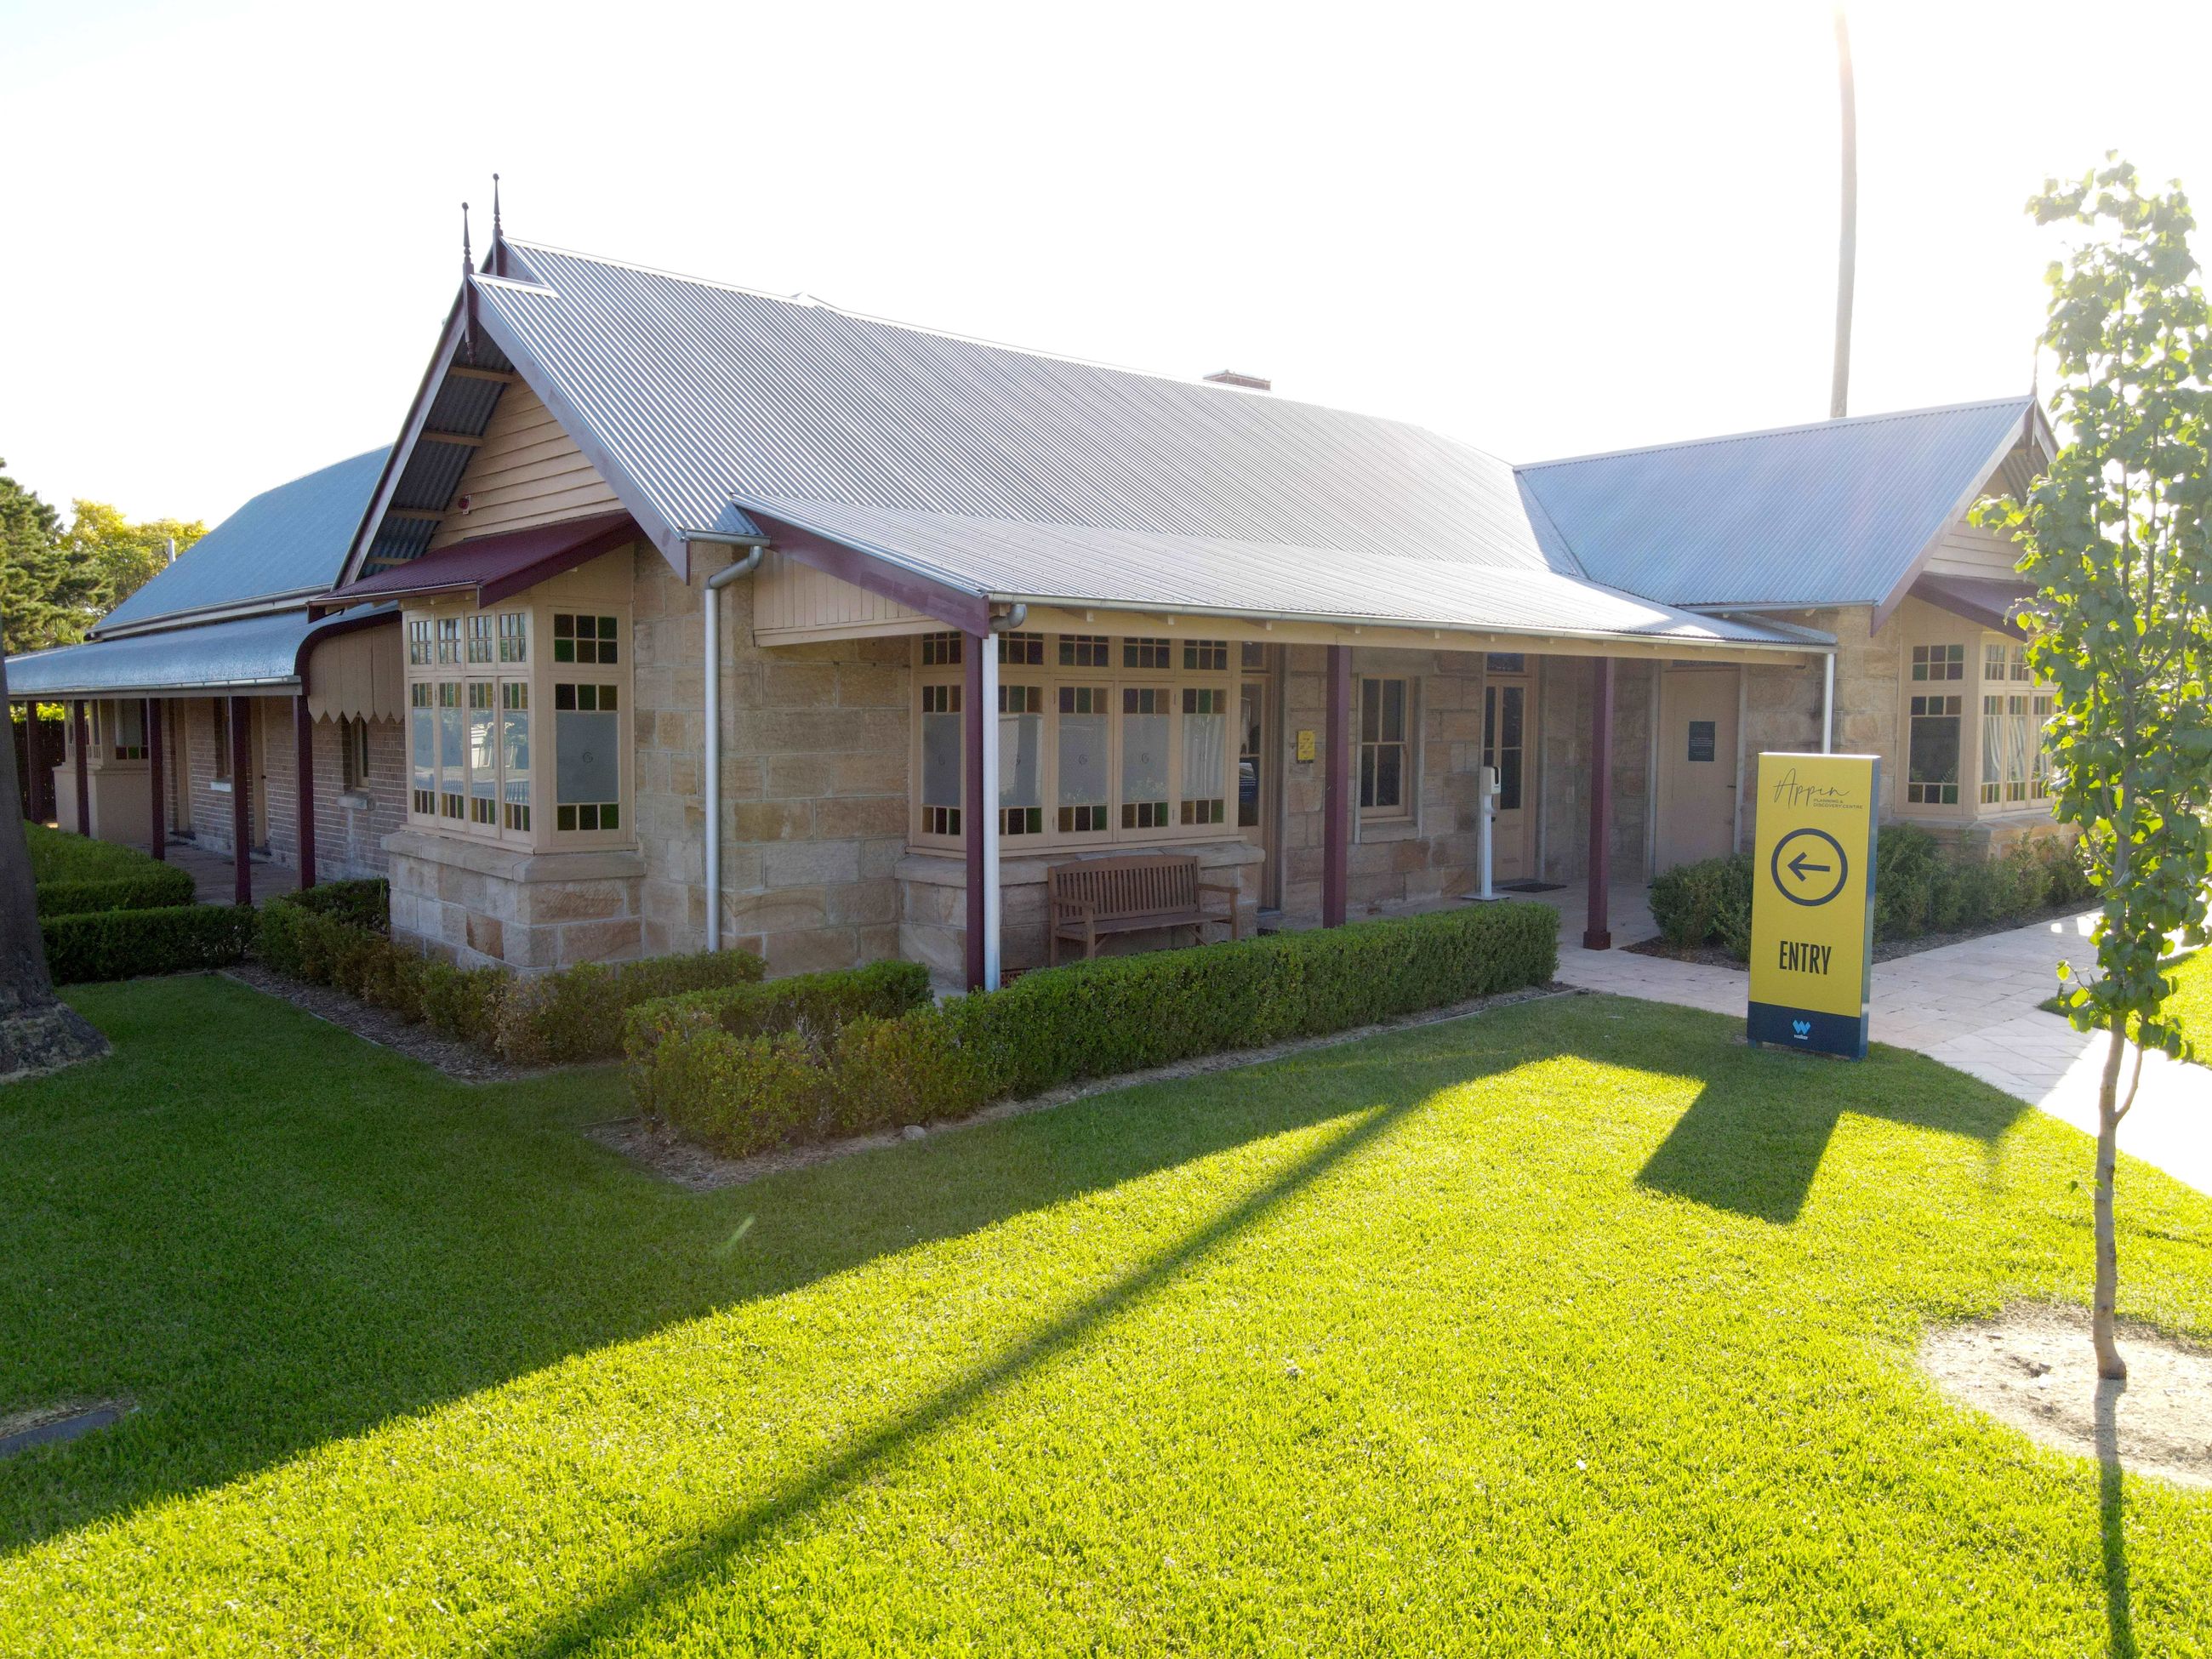 Appin Planning Discovery Centre